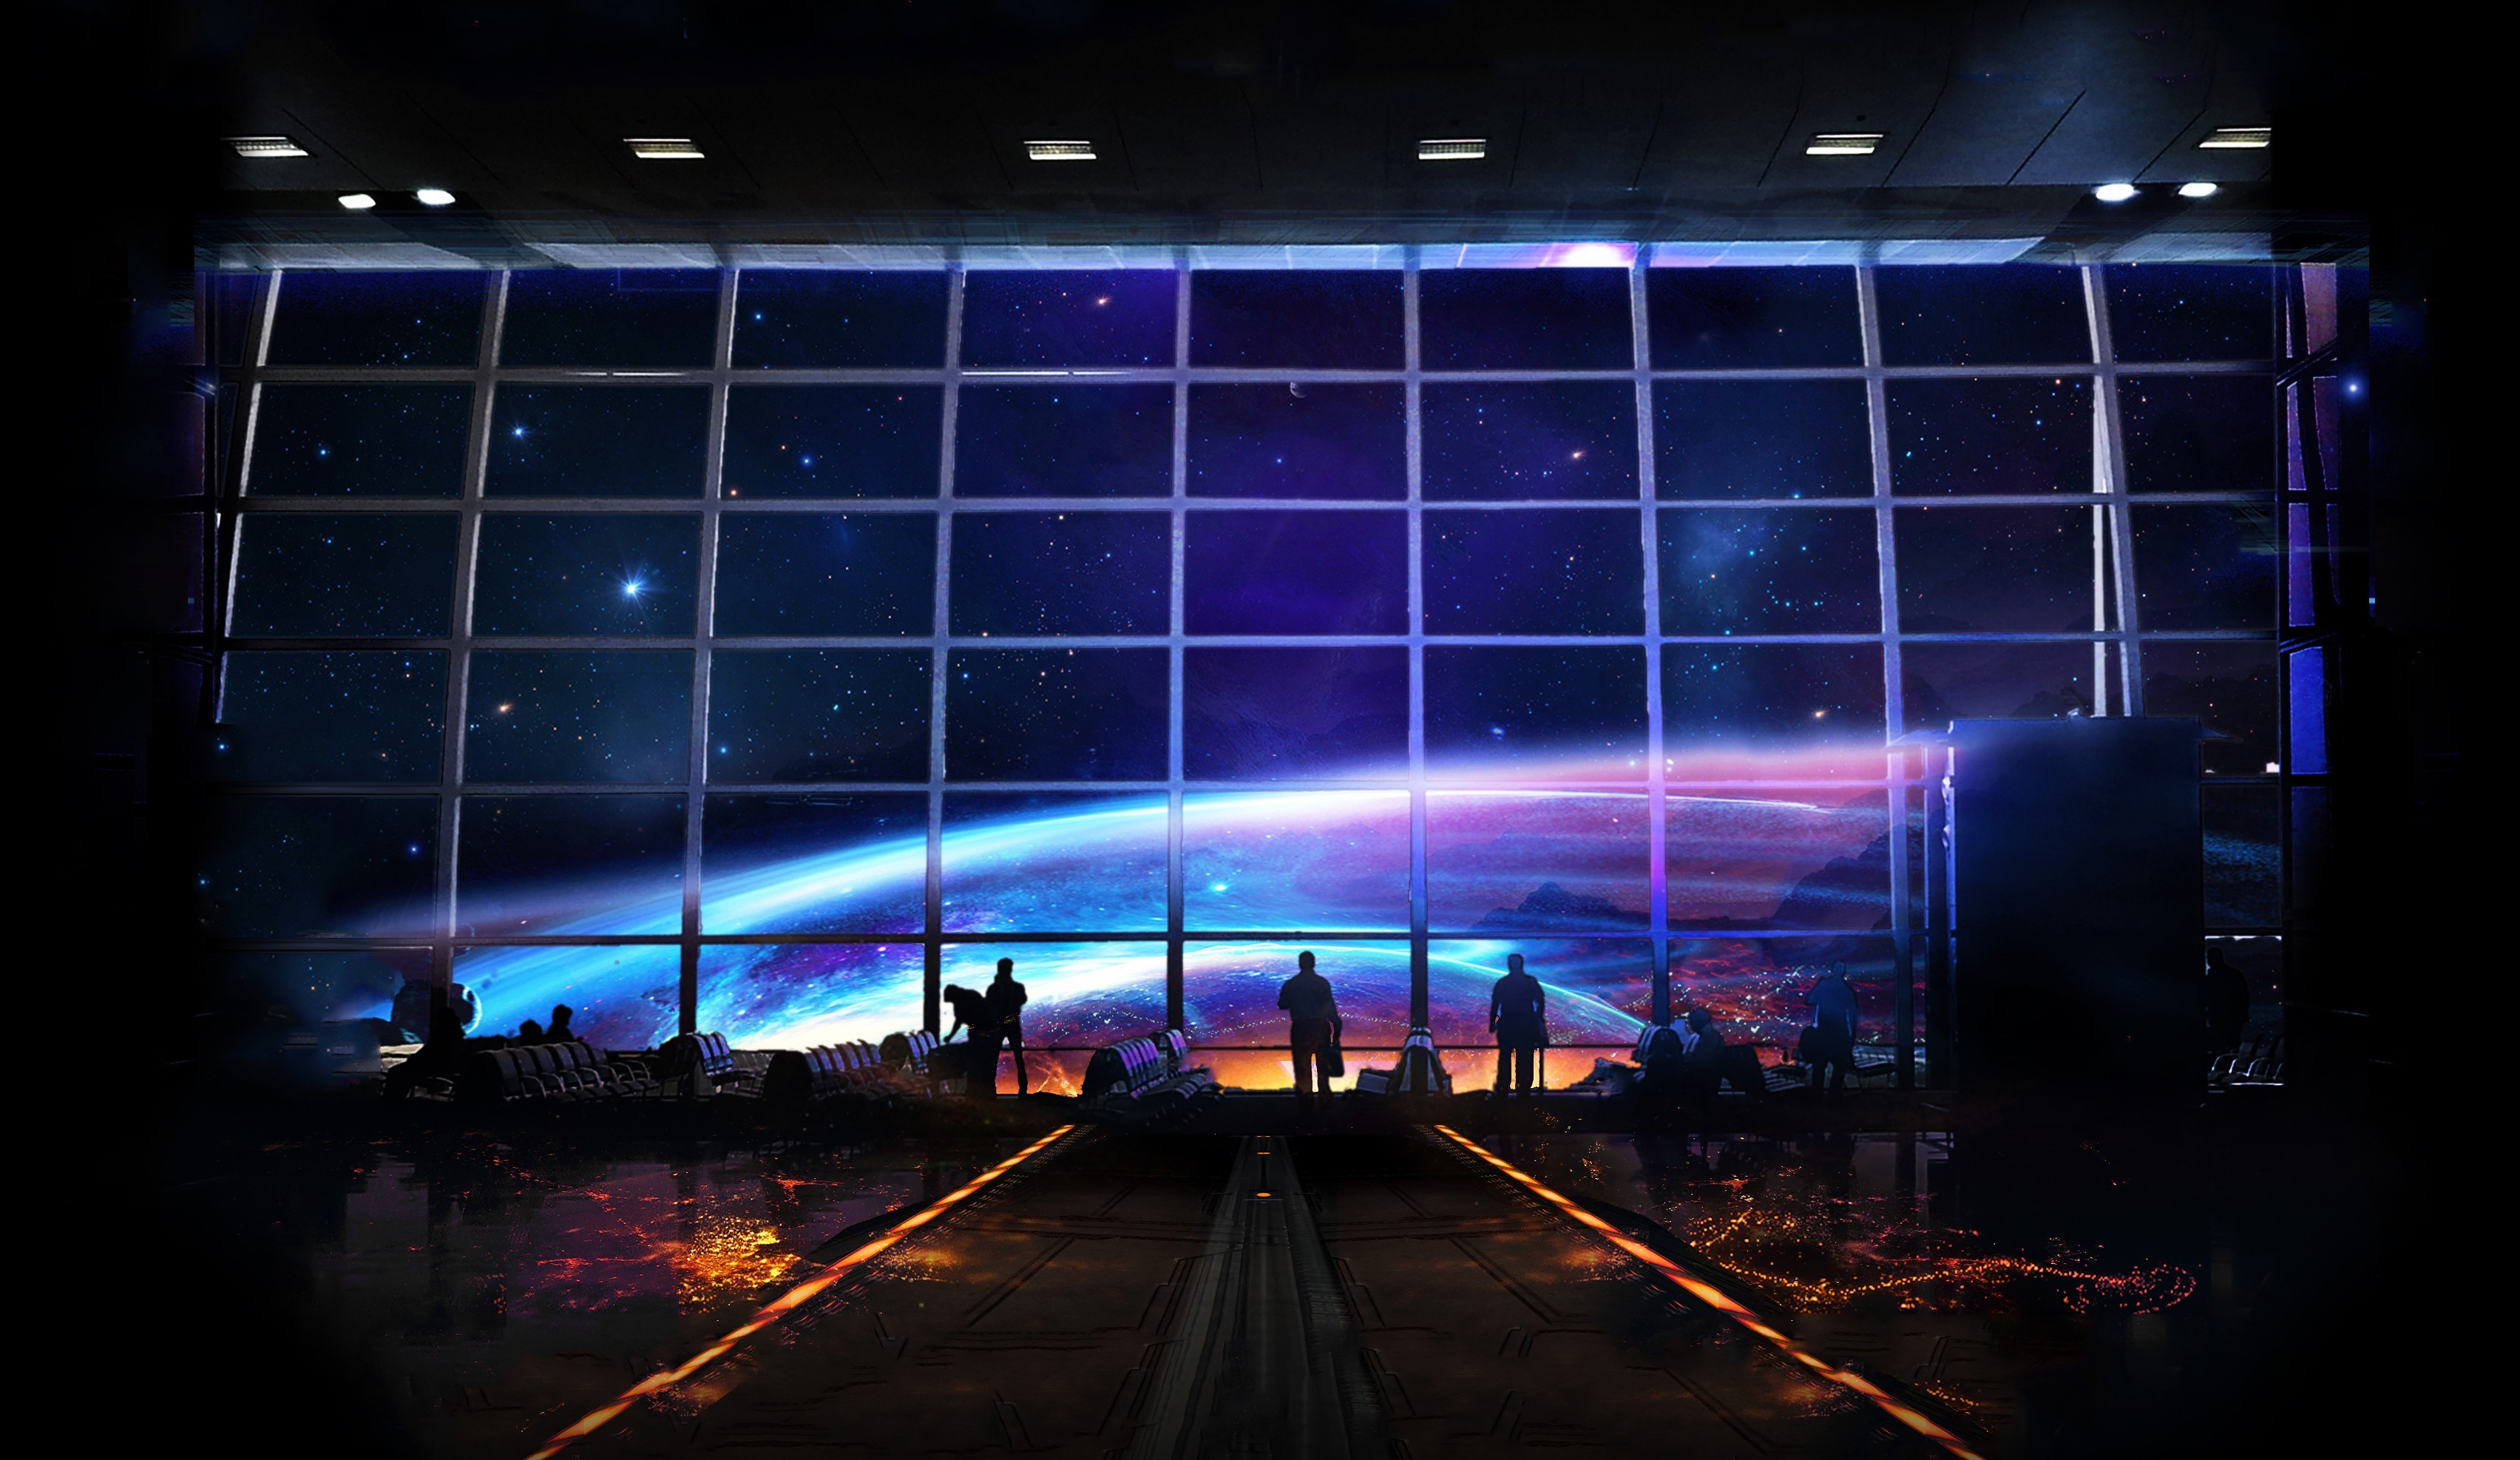 space, Planet, Stars, Airport Wallpaper